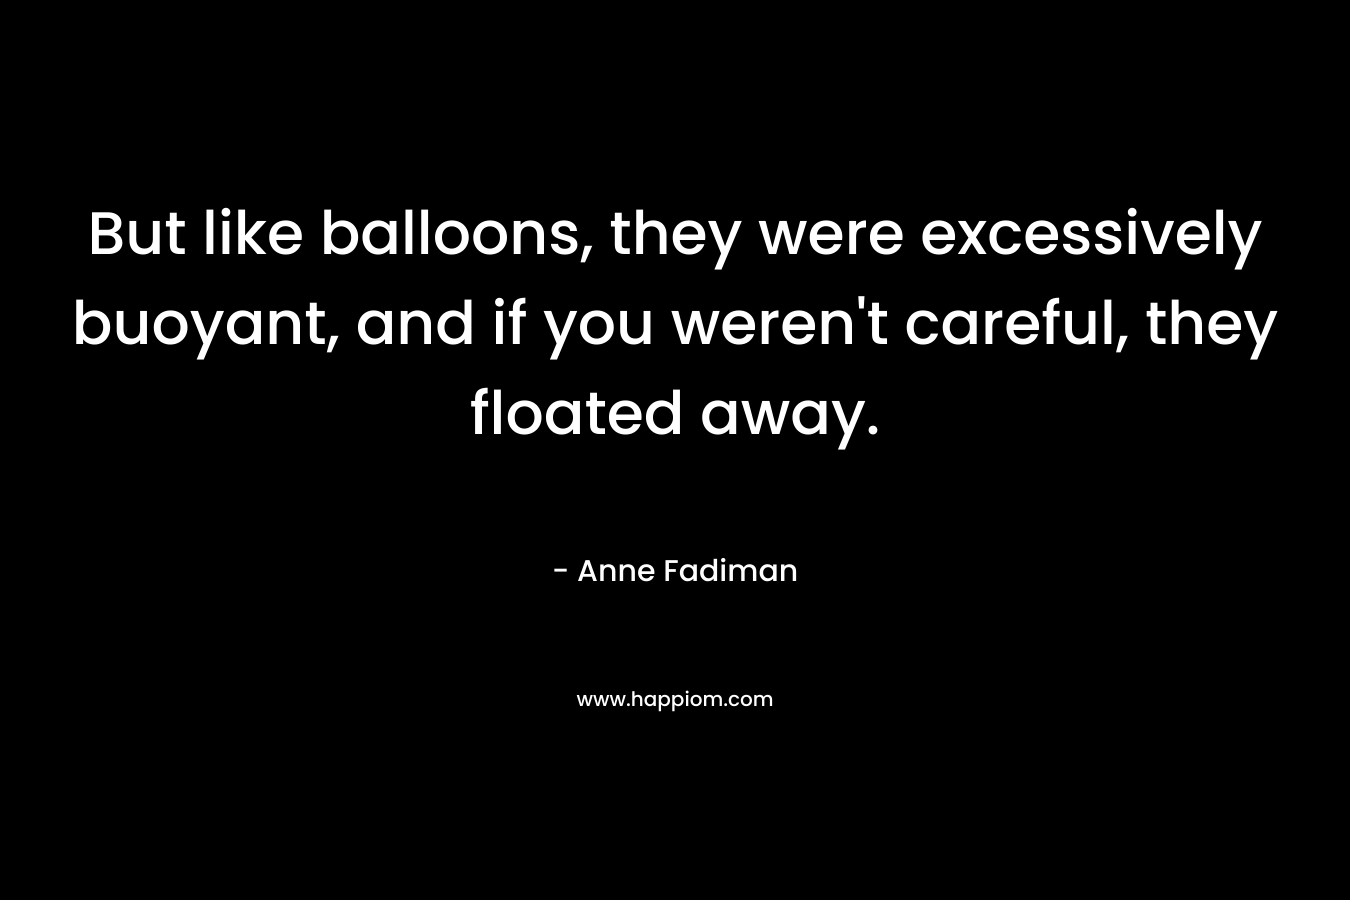 But like balloons, they were excessively buoyant, and if you weren't careful, they floated away.